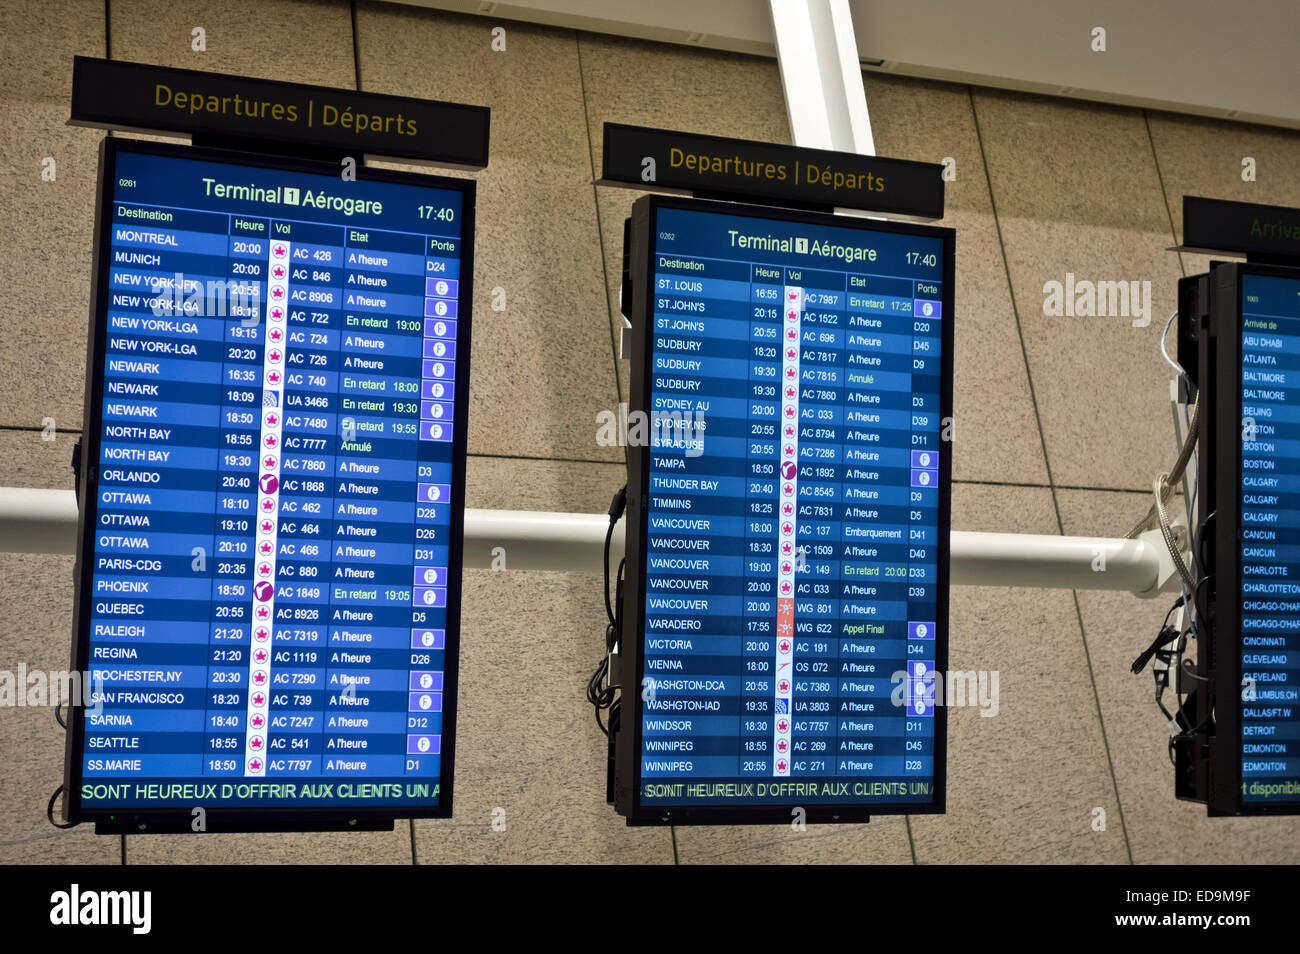 Departure Schedule On Monitor High Resolution Stock Photography and Images  - Alamy